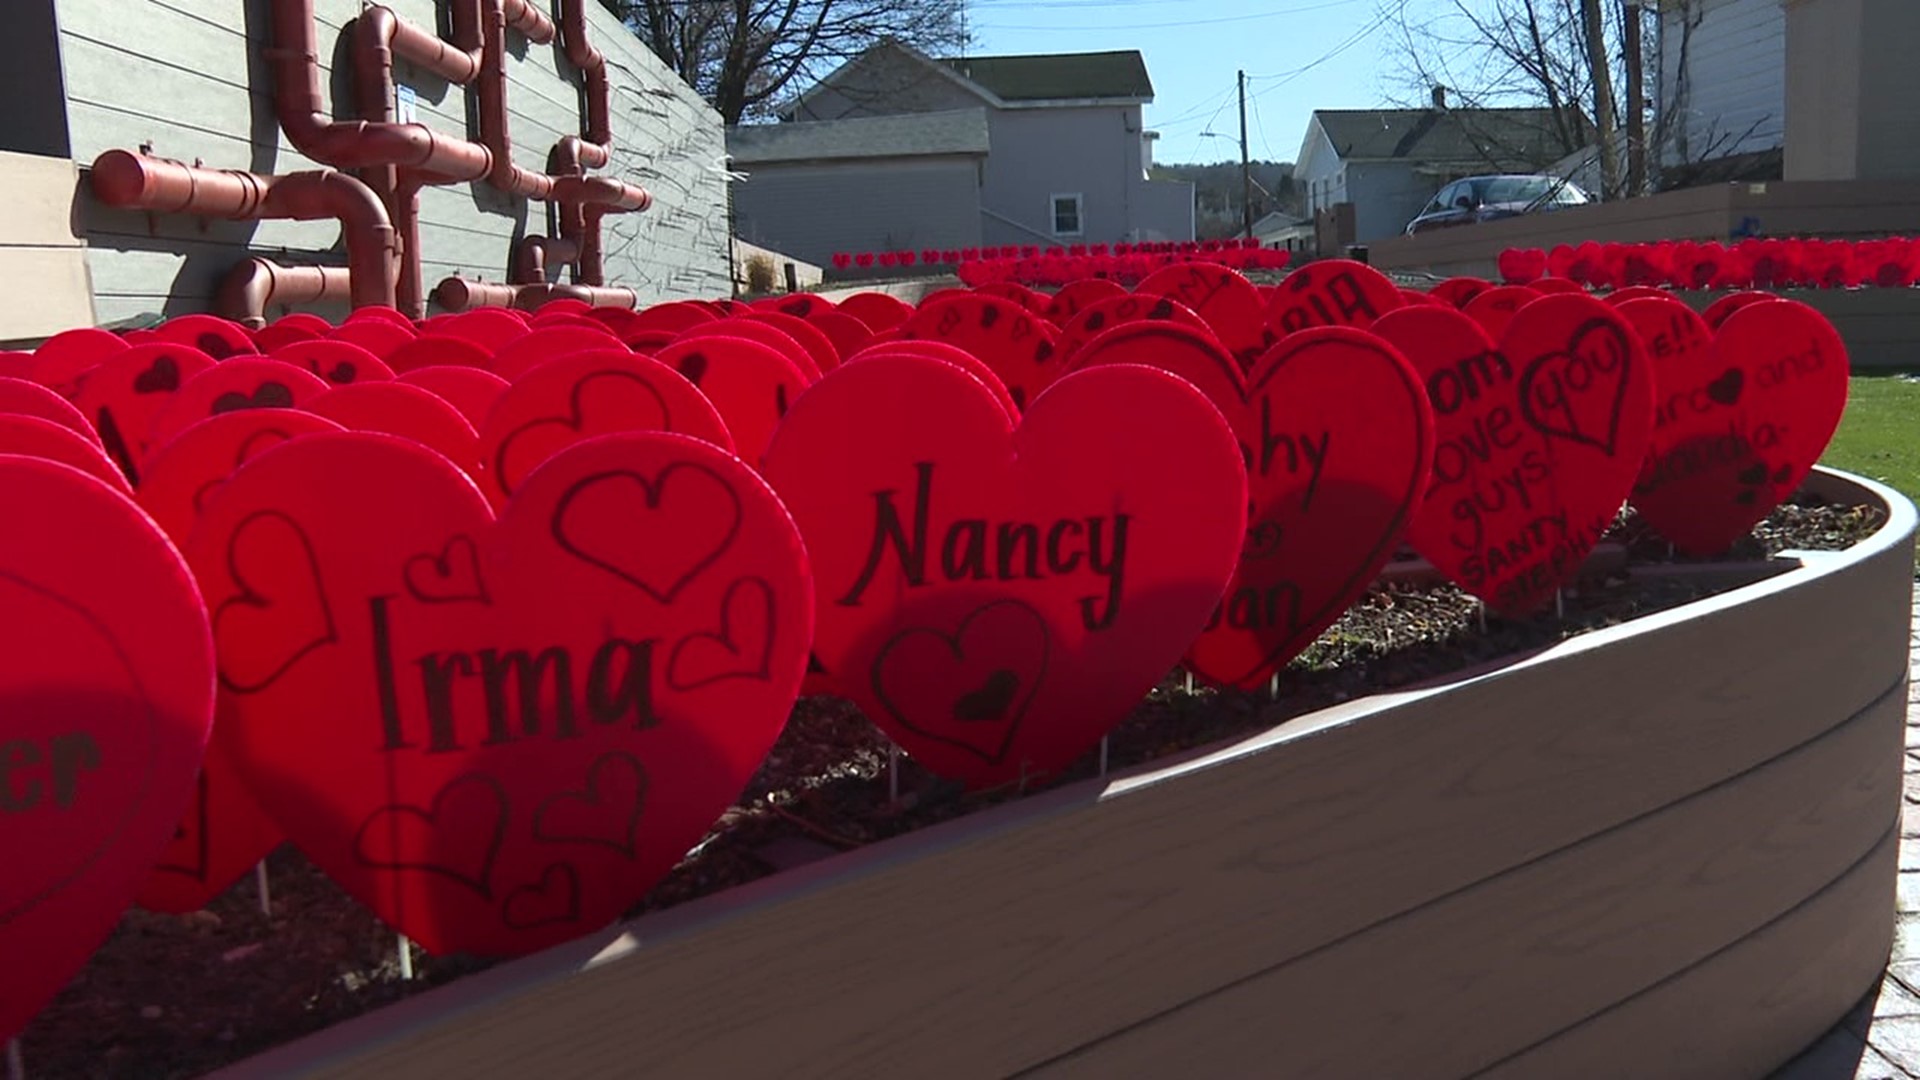 A Scranton man started a project last year to spread the love and is continuing that effort by sharing messages on hearts in a community garden.